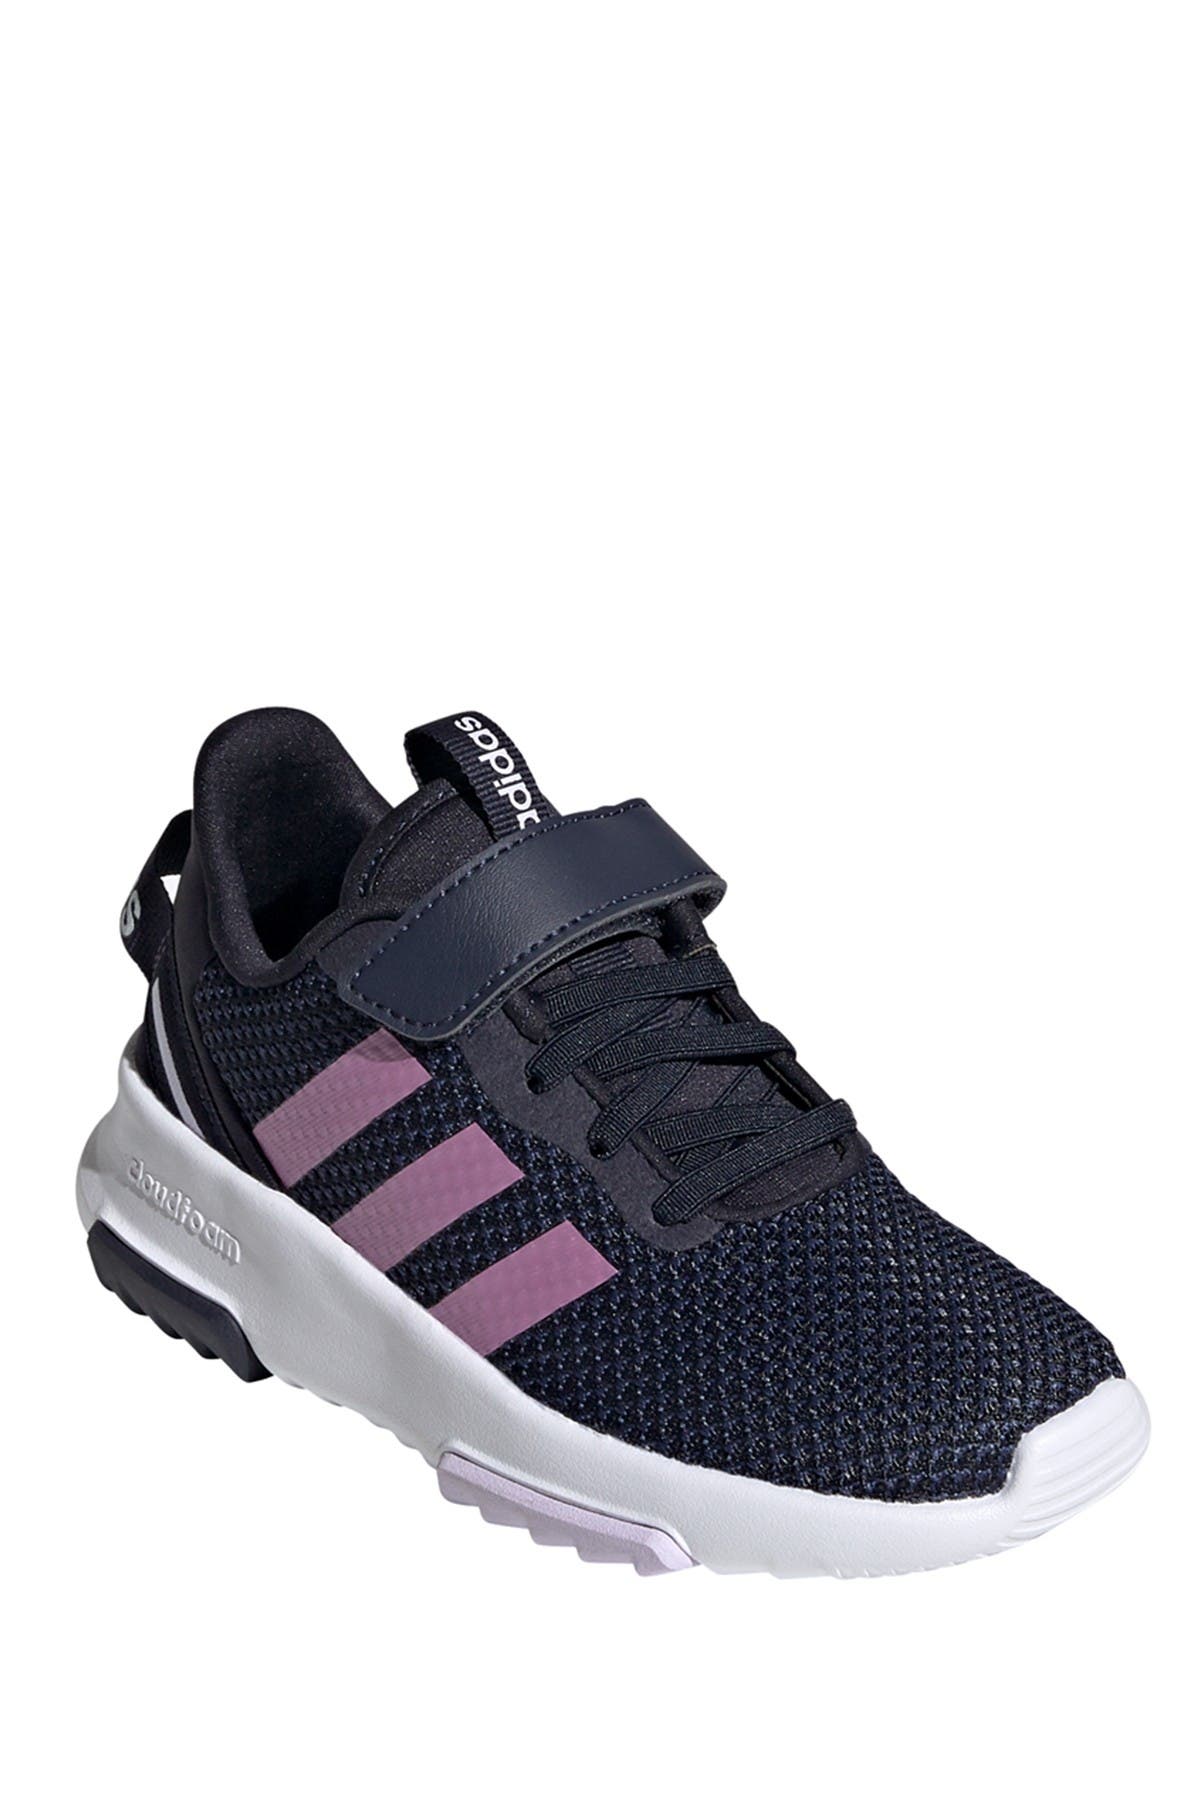 adidas racer tr 2.0 shoes